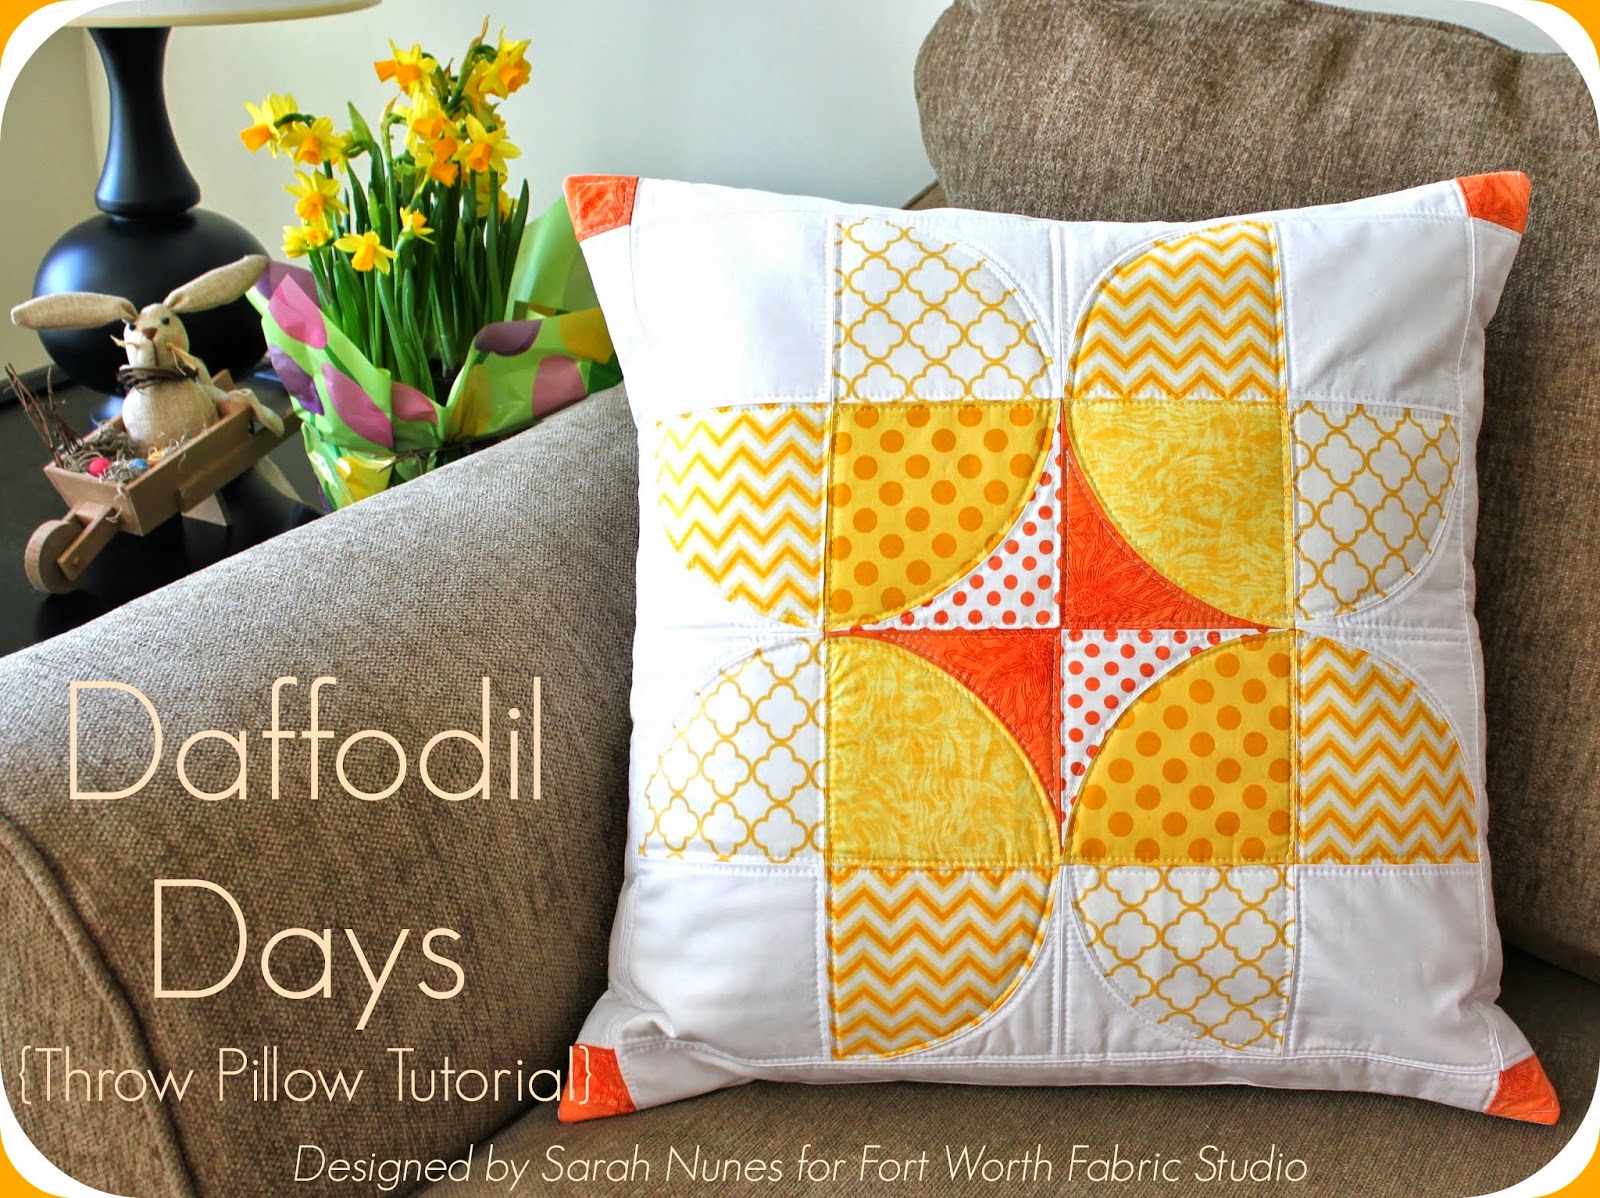 Daffodil Days {Throw Pillow Tutorial} designed by Sarah Nunes for Fort Worth Fabric Studio